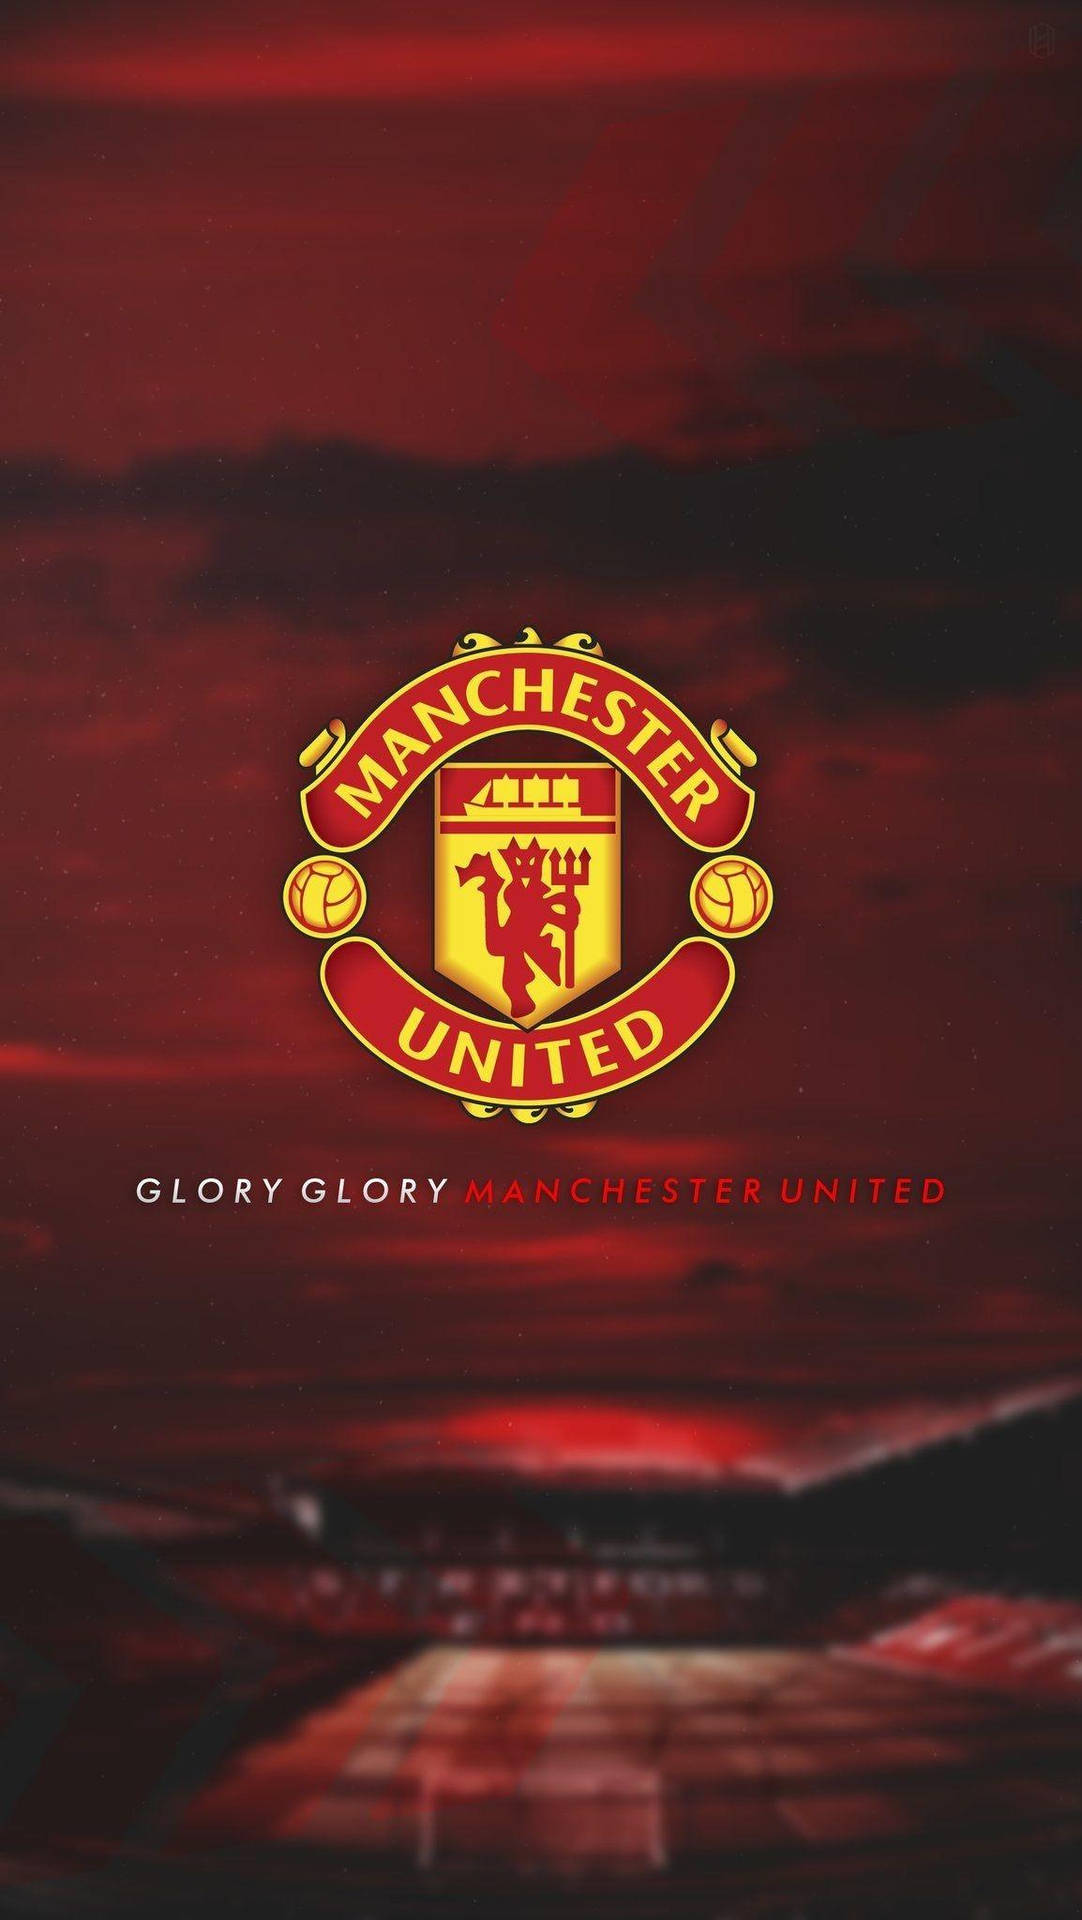 Manchester United Emblem With A Fiery Background